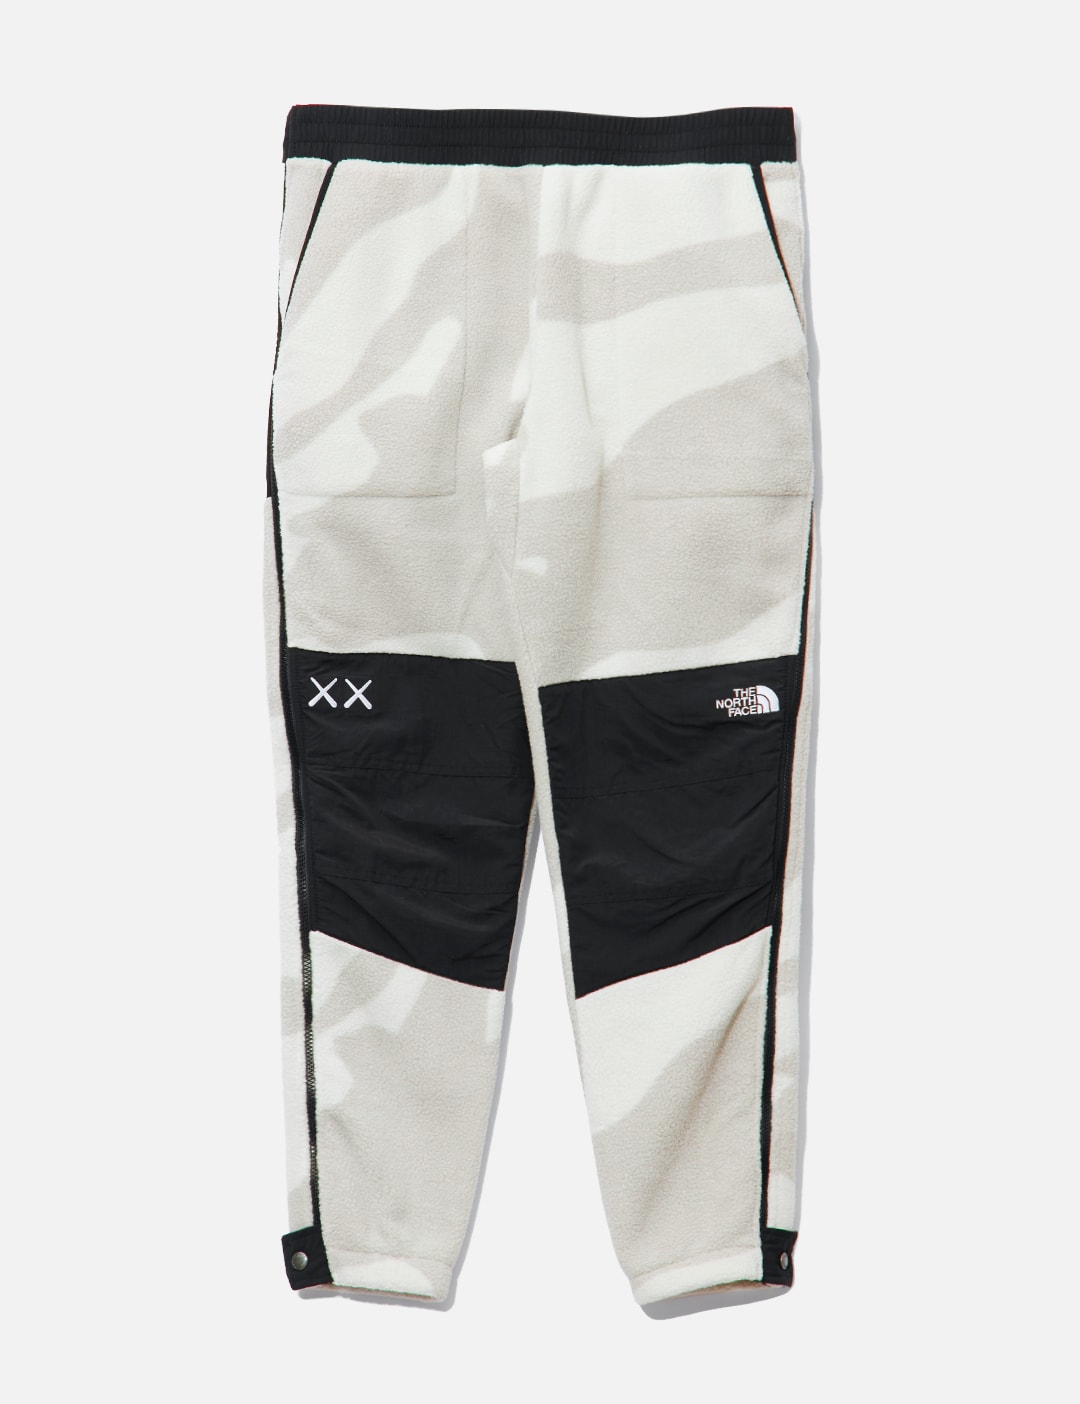 grote Oceaan Vervagen Compatibel met The North Face - The North Face x Kaws Fleece Pants | HBX - Globally  Curated Fashion and Lifestyle by Hypebeast